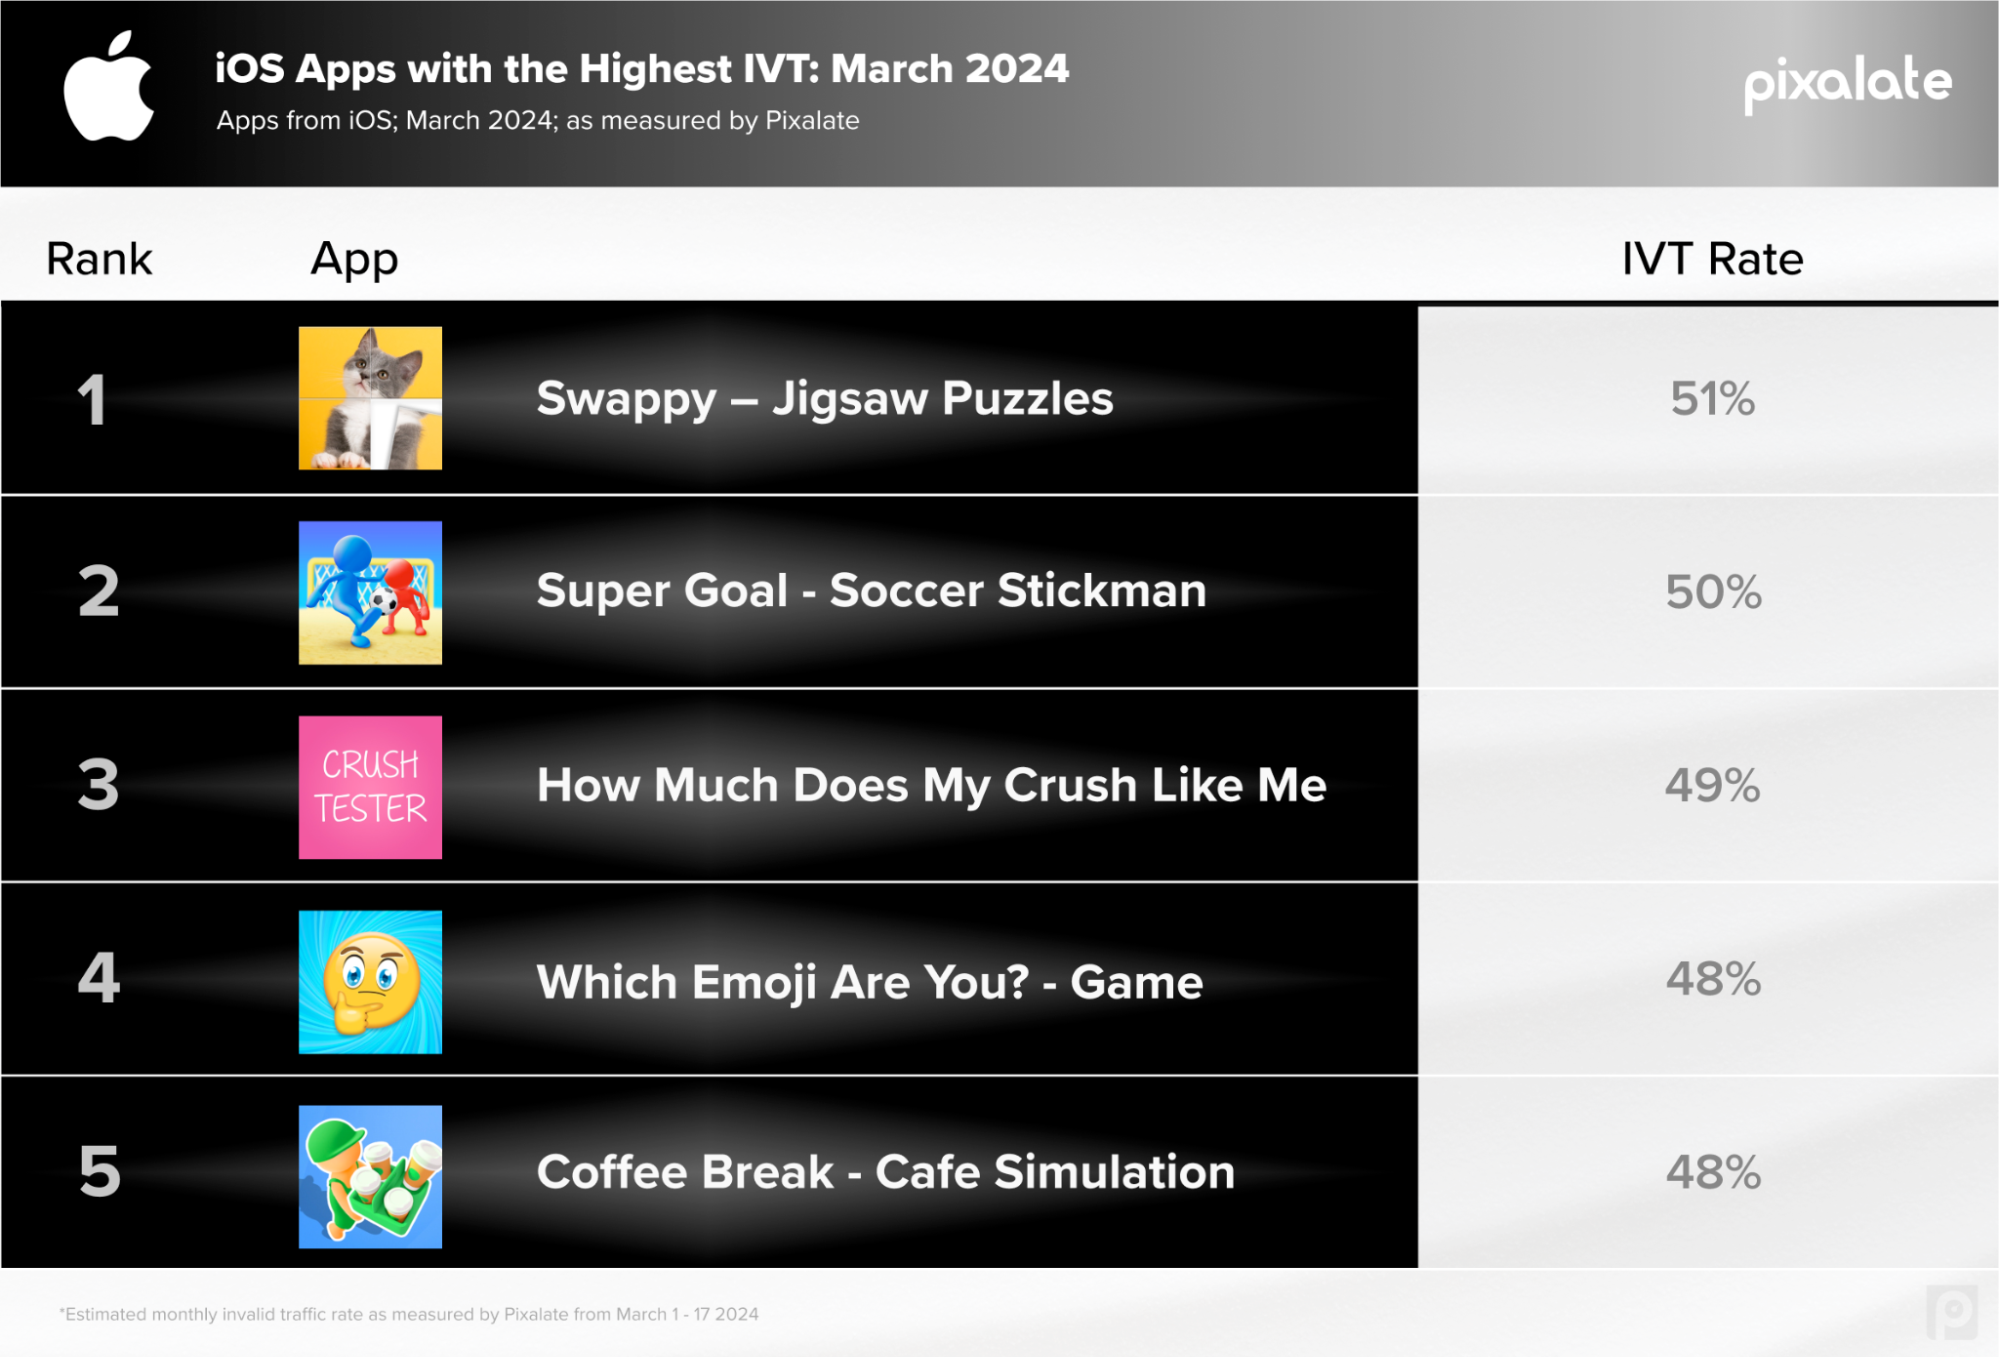 Apple App Store Apps With the Highest Rates of IVT - March 2024